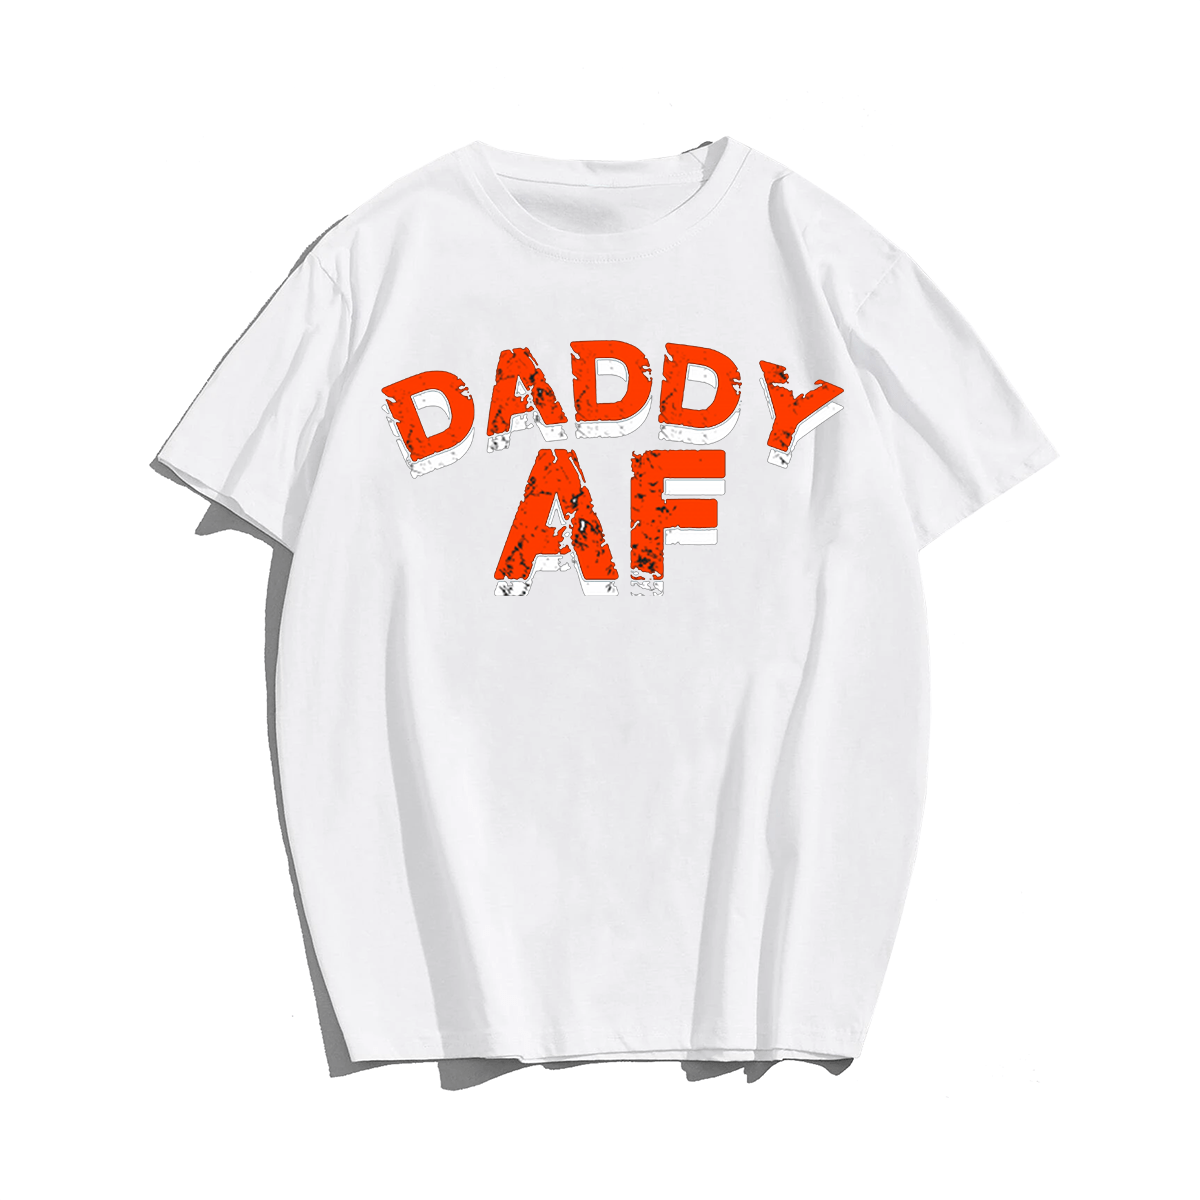 Daddy AF T-shirt for Men, Oversize Plus Size Big & Tall Man Clothing